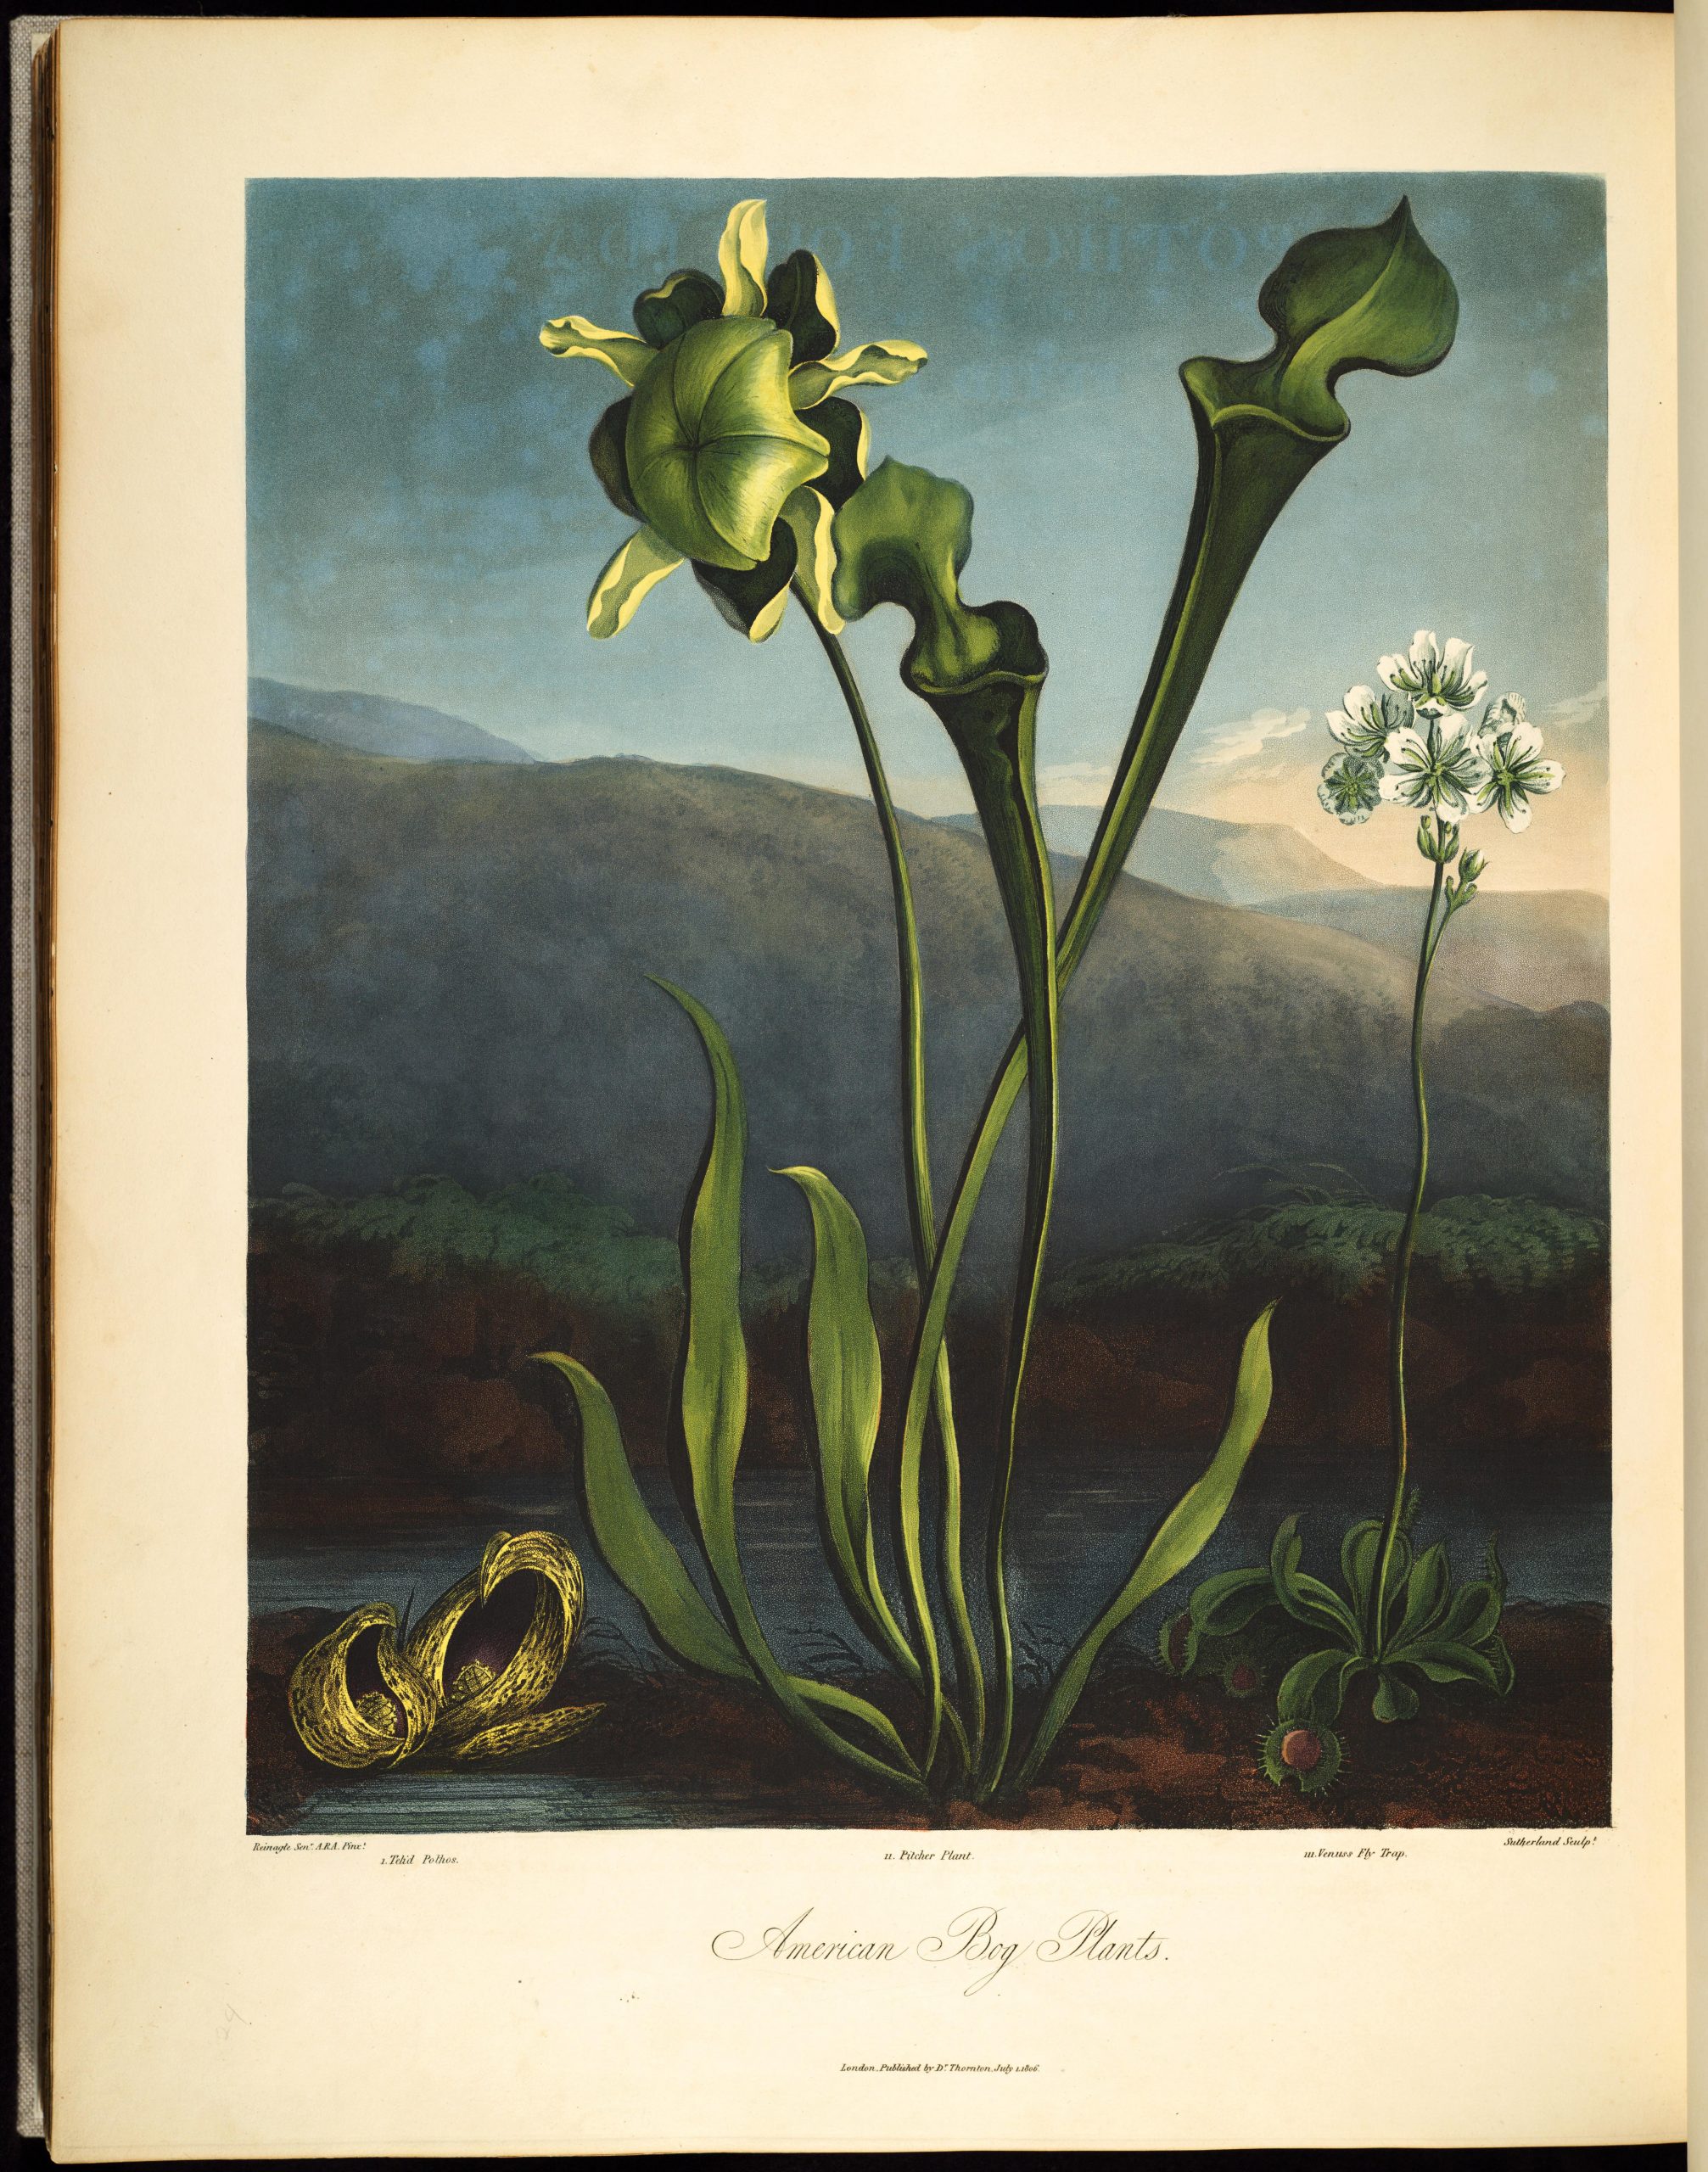 A pitcher plant with pitcher "lid" open and a closed blossom in the foreground. A Venus flytrap with open "traps" and a cluster of white blossoms.